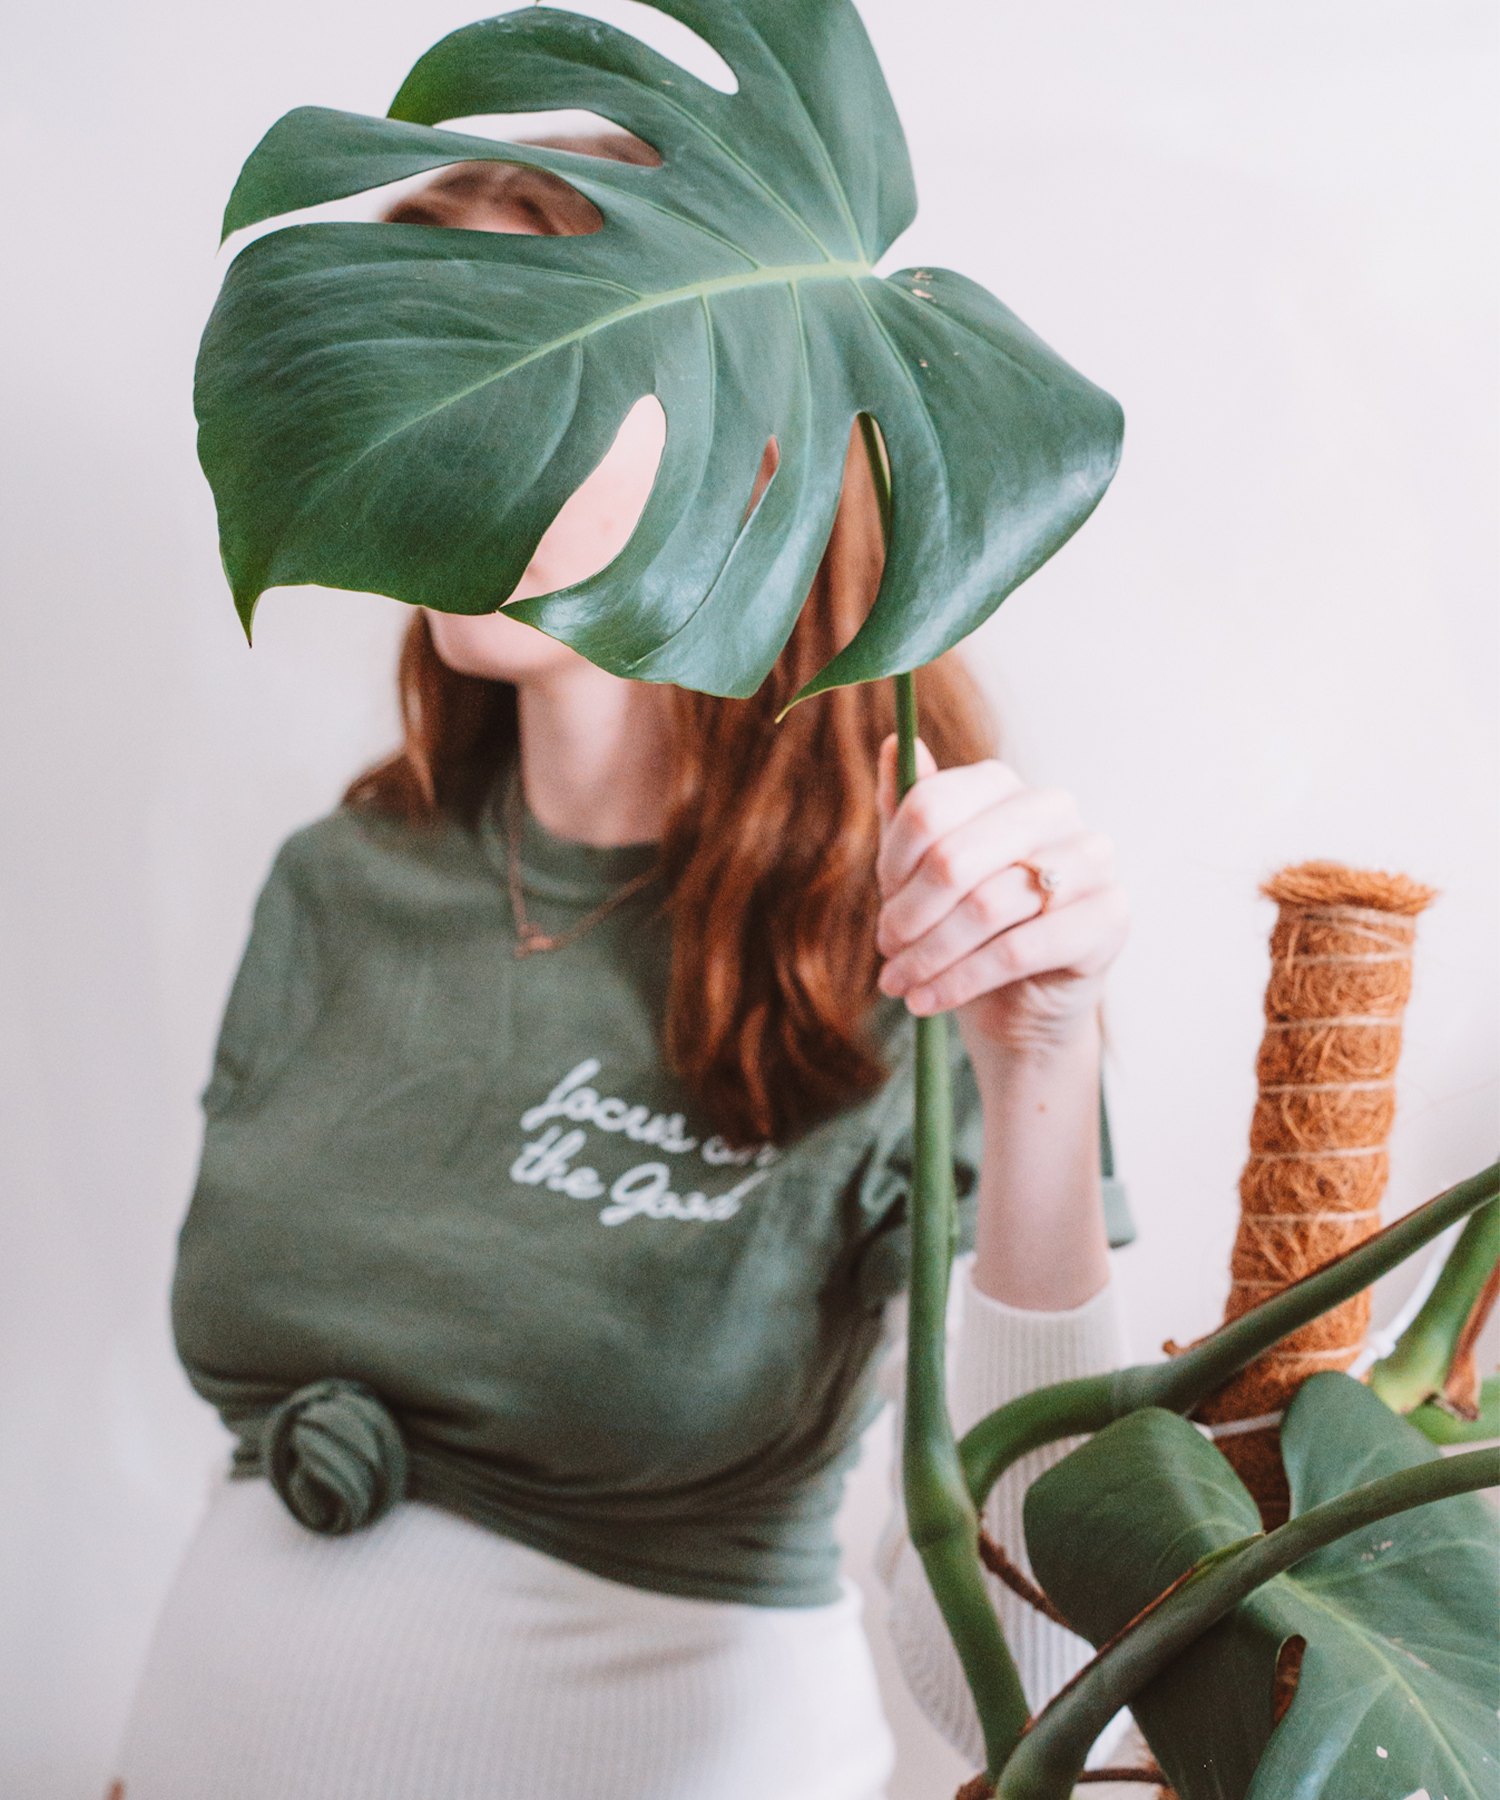 A model is posed hiding her face behind a large monstera leaf. She is wearing a "Focus on the Good" t-shirt, stylishly knotted in the front.